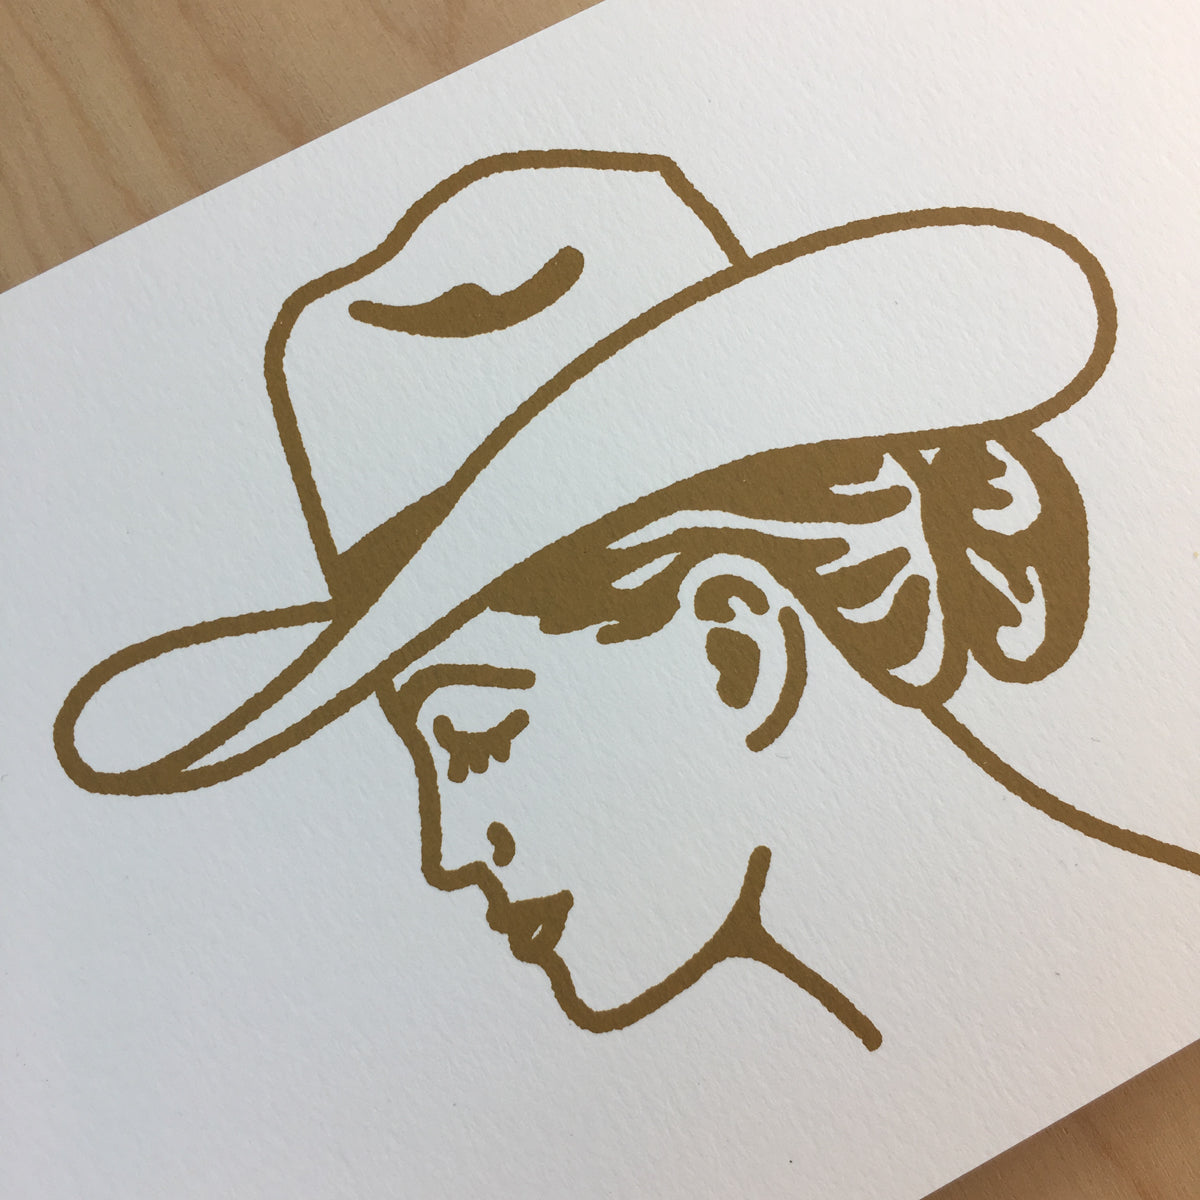 Austin Cowgirl - Signed Print #145 GOLD